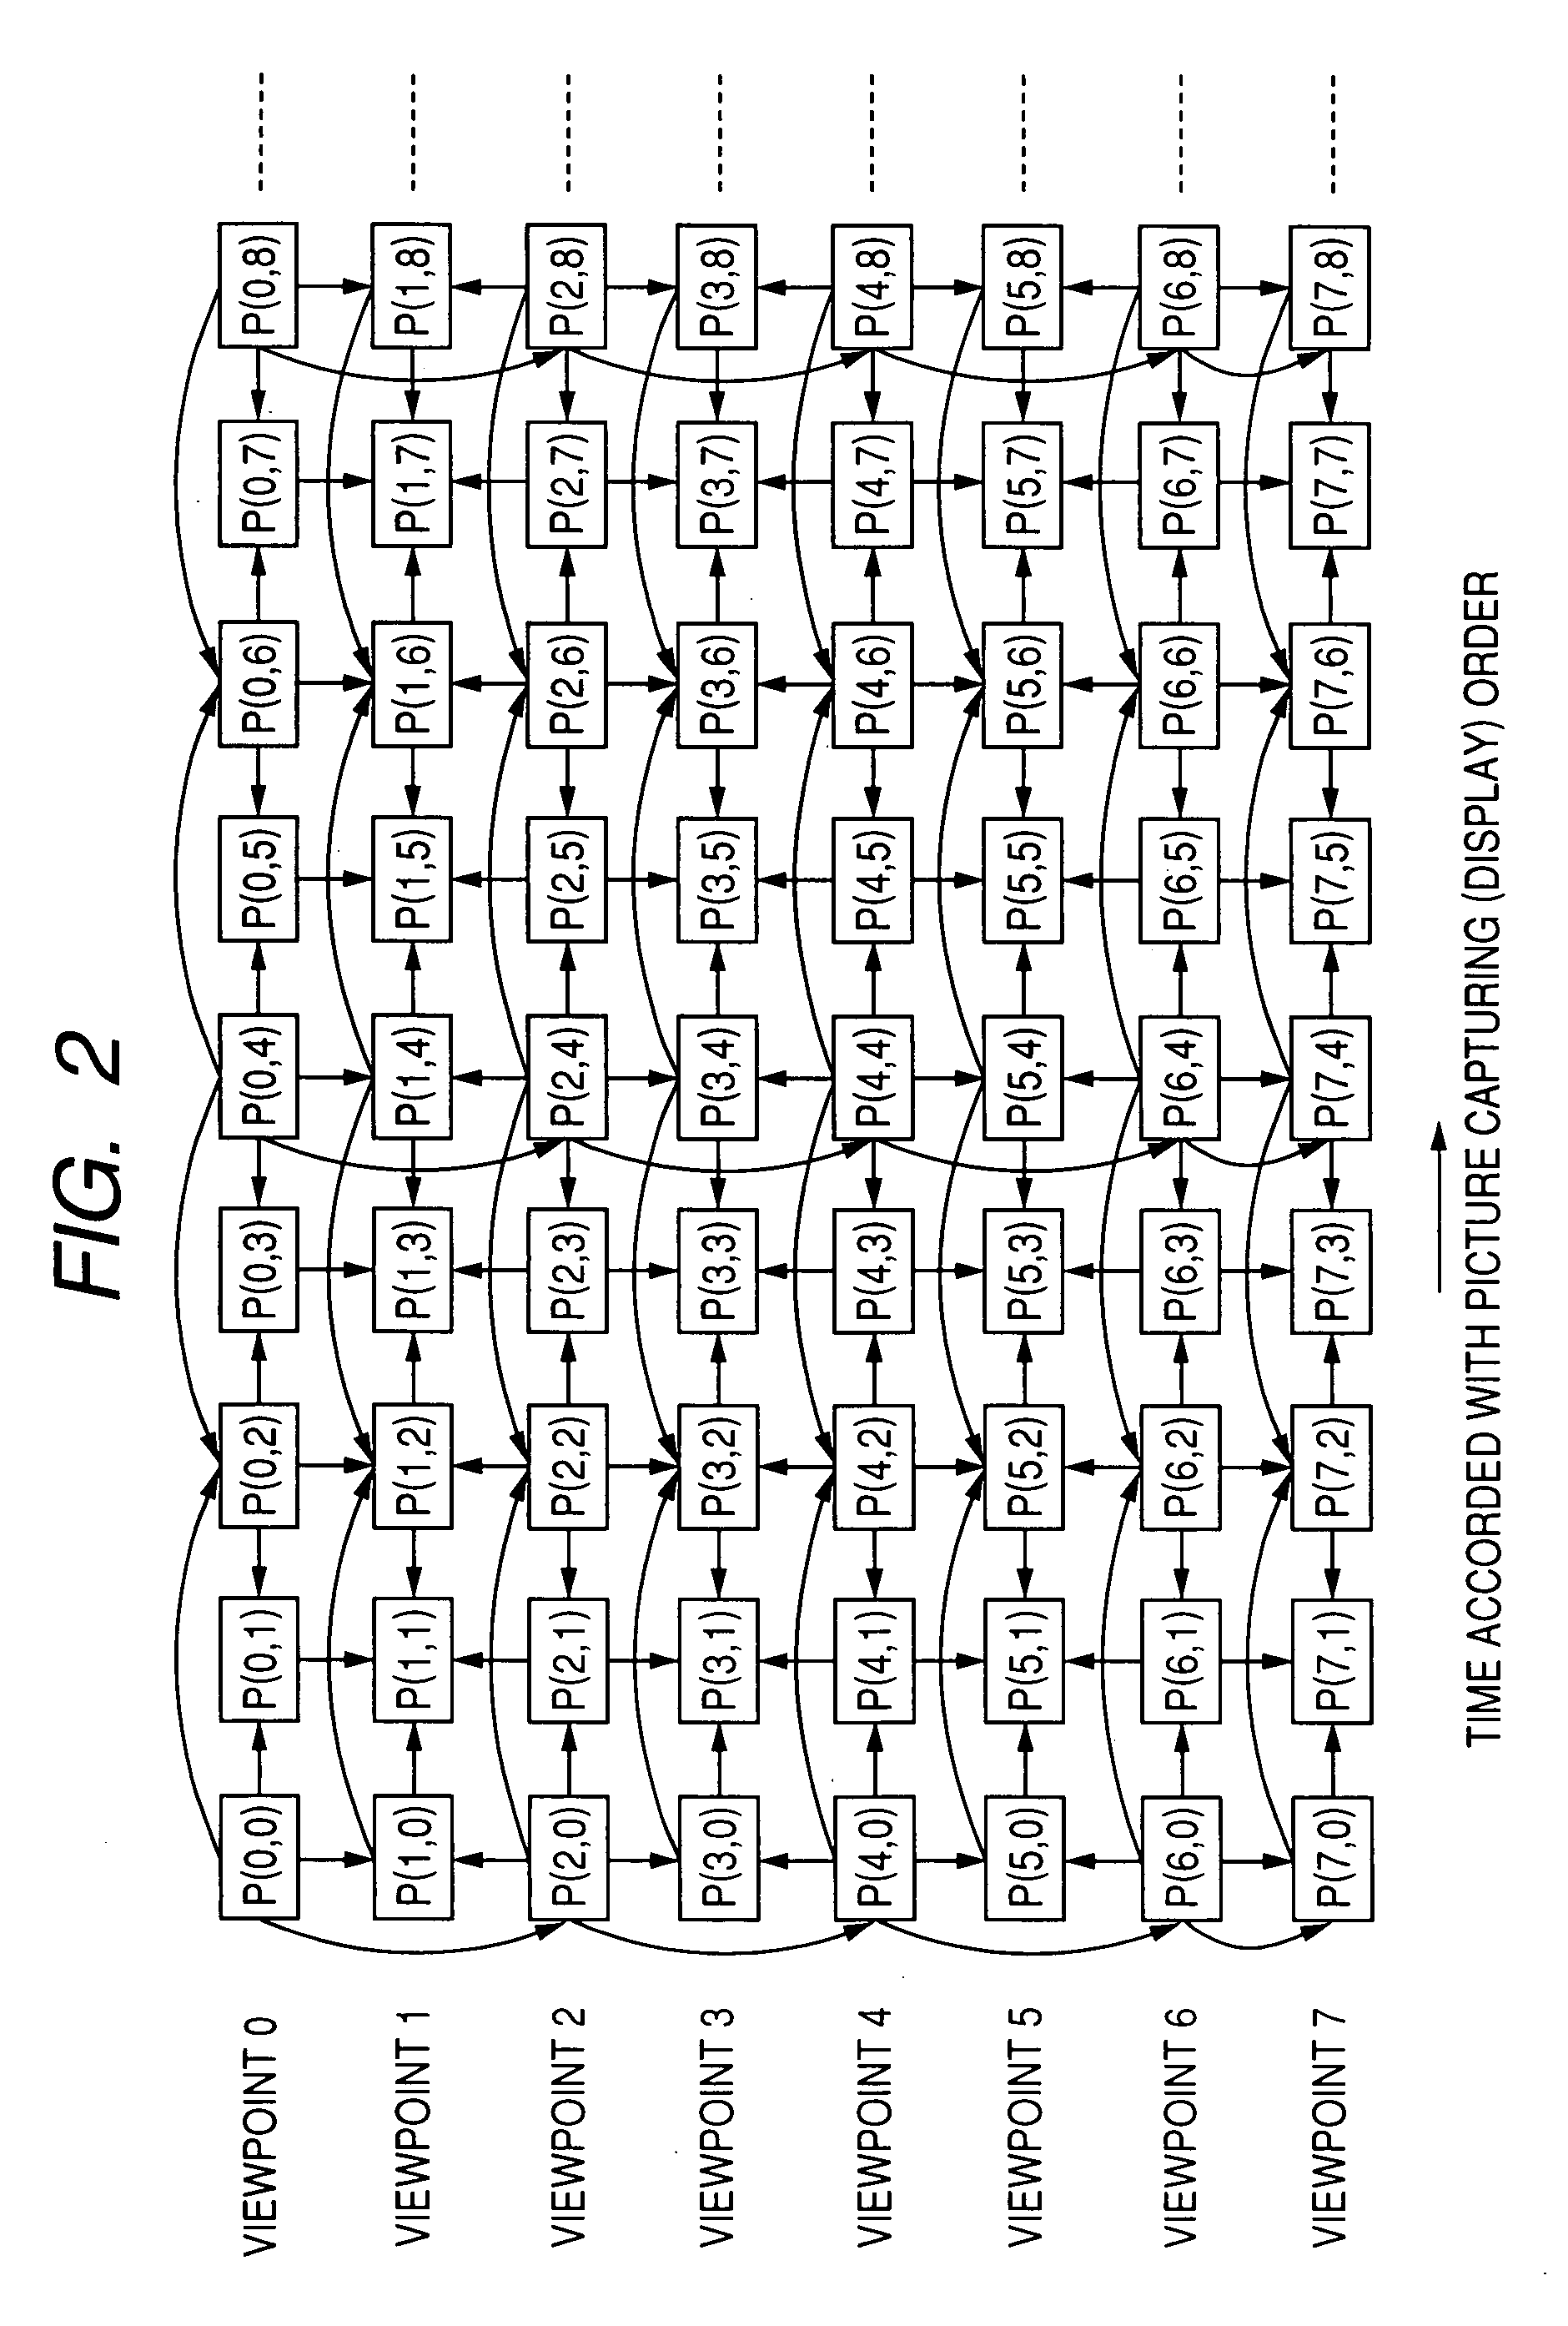 Method and apparatus for encoding and decoding multi-view video signal, and related computer programs